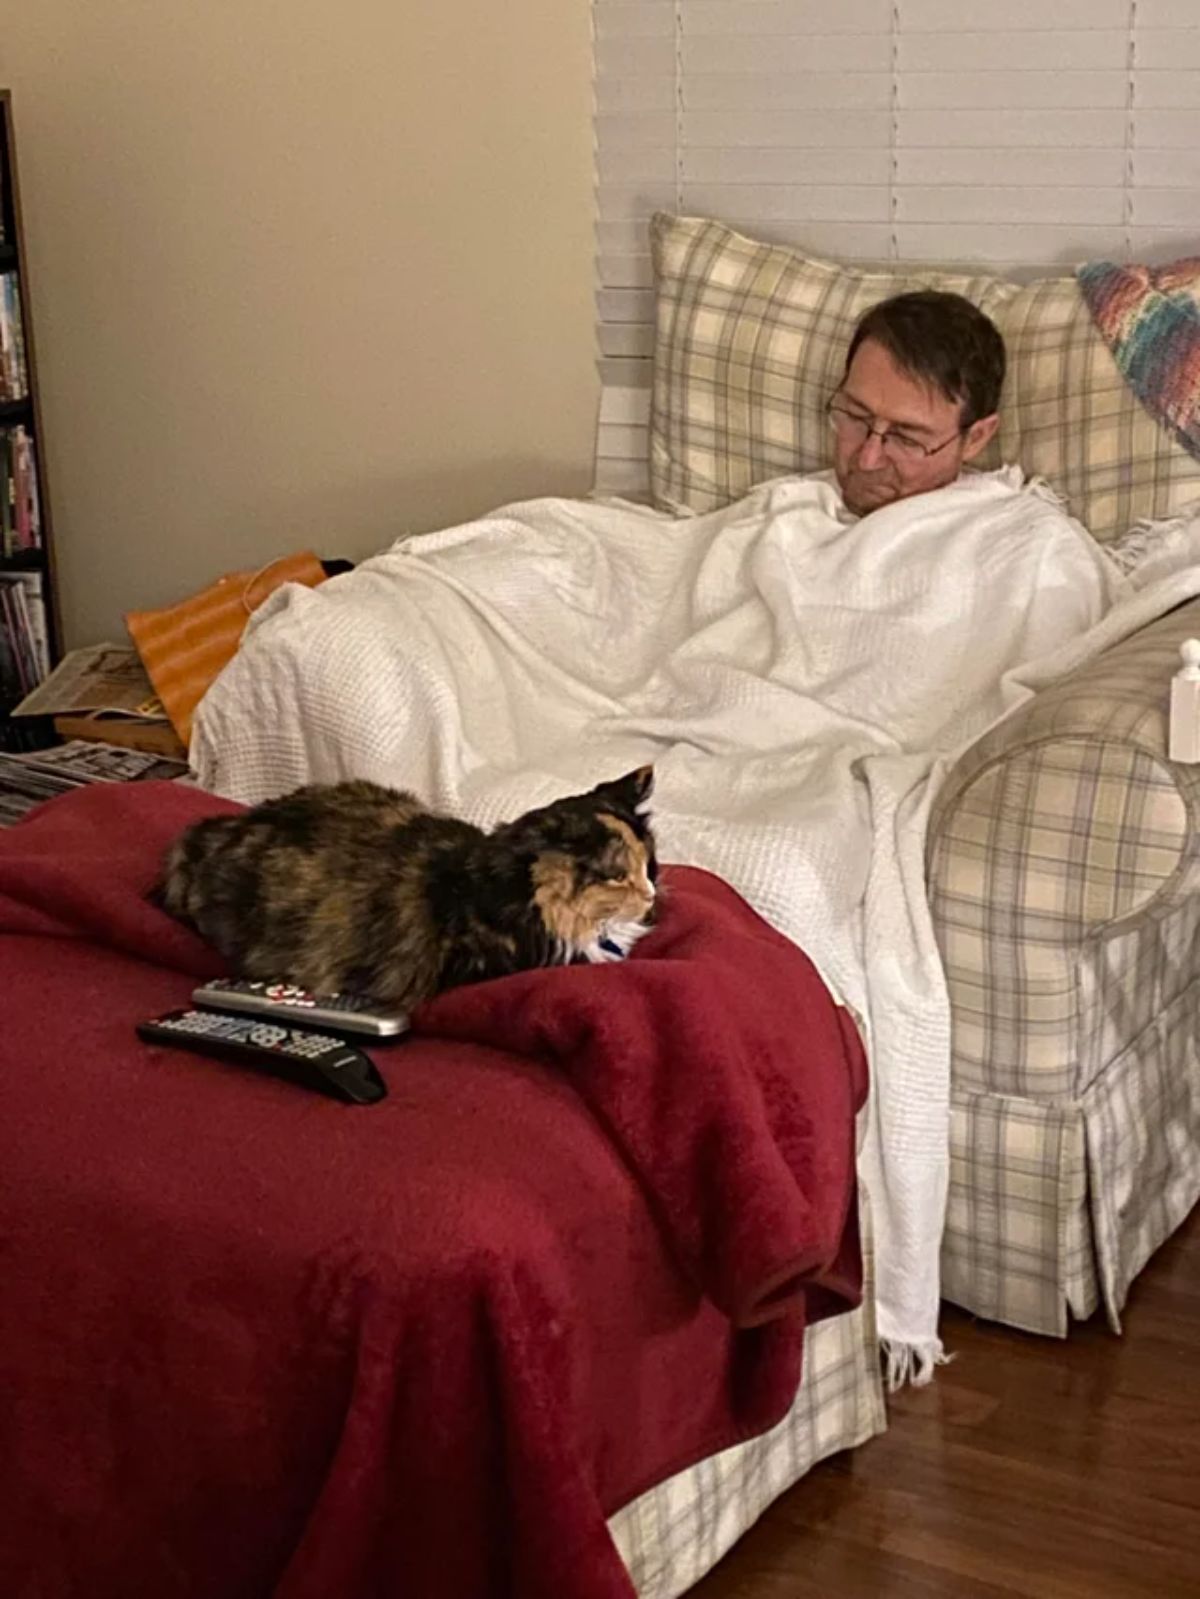 black orange and white cat laying on a red blanket in front of a man covered in a white blanket